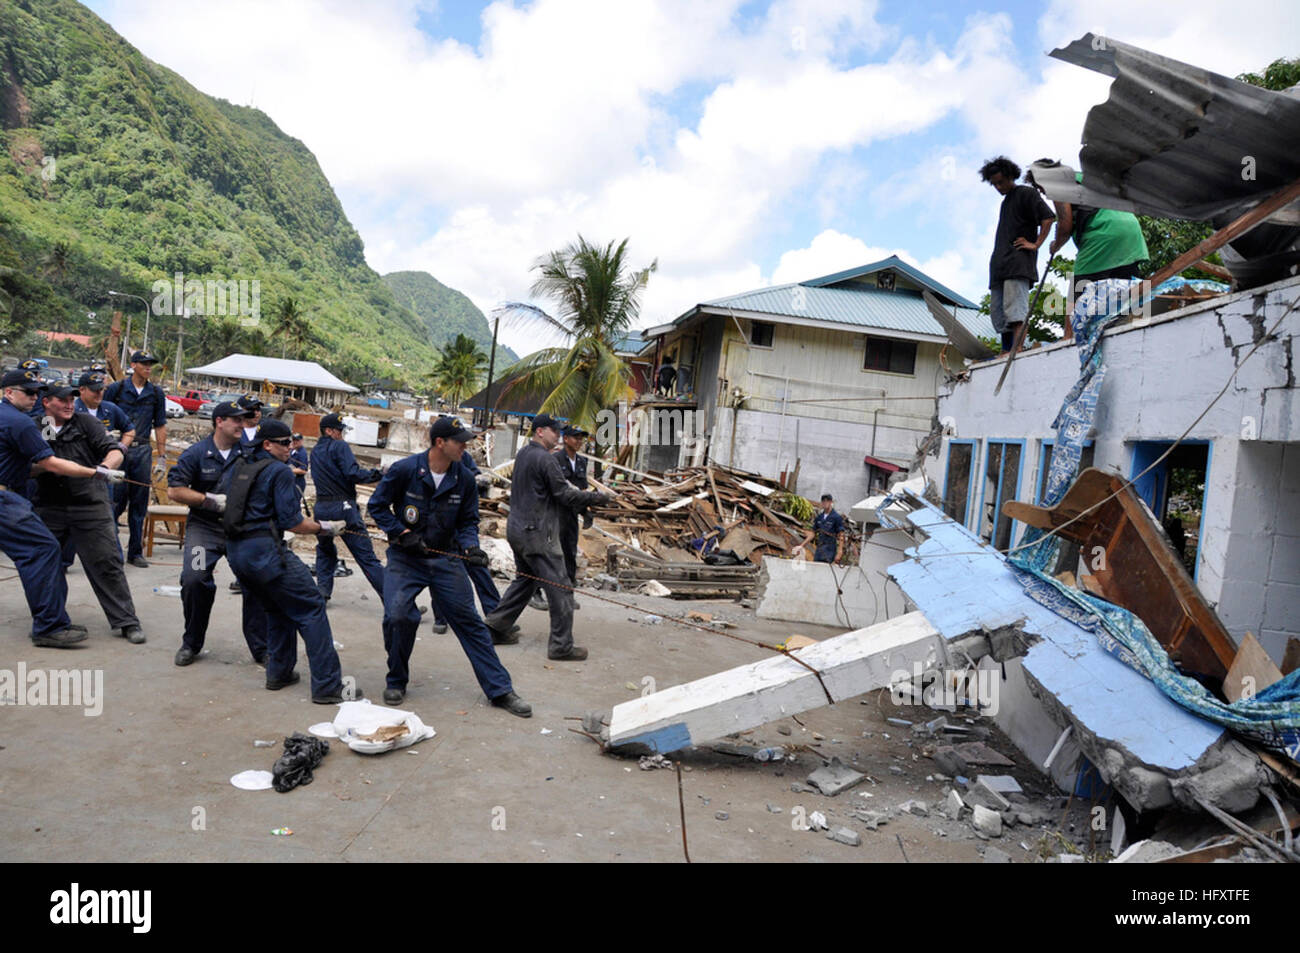 091003-F-3798Y-352 PAGO PAGO (Oct. 3, 2009) Sailors assigned to the guided-missile frigate USS Ingraham (FFG 61) clear away a damaged roof during disaster recovery efforts in Pago Pago, American Samoa. The region was struck by an earthquake and resulting tsunami. (U.S. Air Force photo by Tech. Sgt. Cohen A. Young/Released) US Navy 091003-F-3798Y-352 Sailors assigned to the guided-missile frigate USS Ingraham (FFG 61) clear away a damaged roof during disaster recovery efforts in Pago Pago, American Samoa Stock Photo